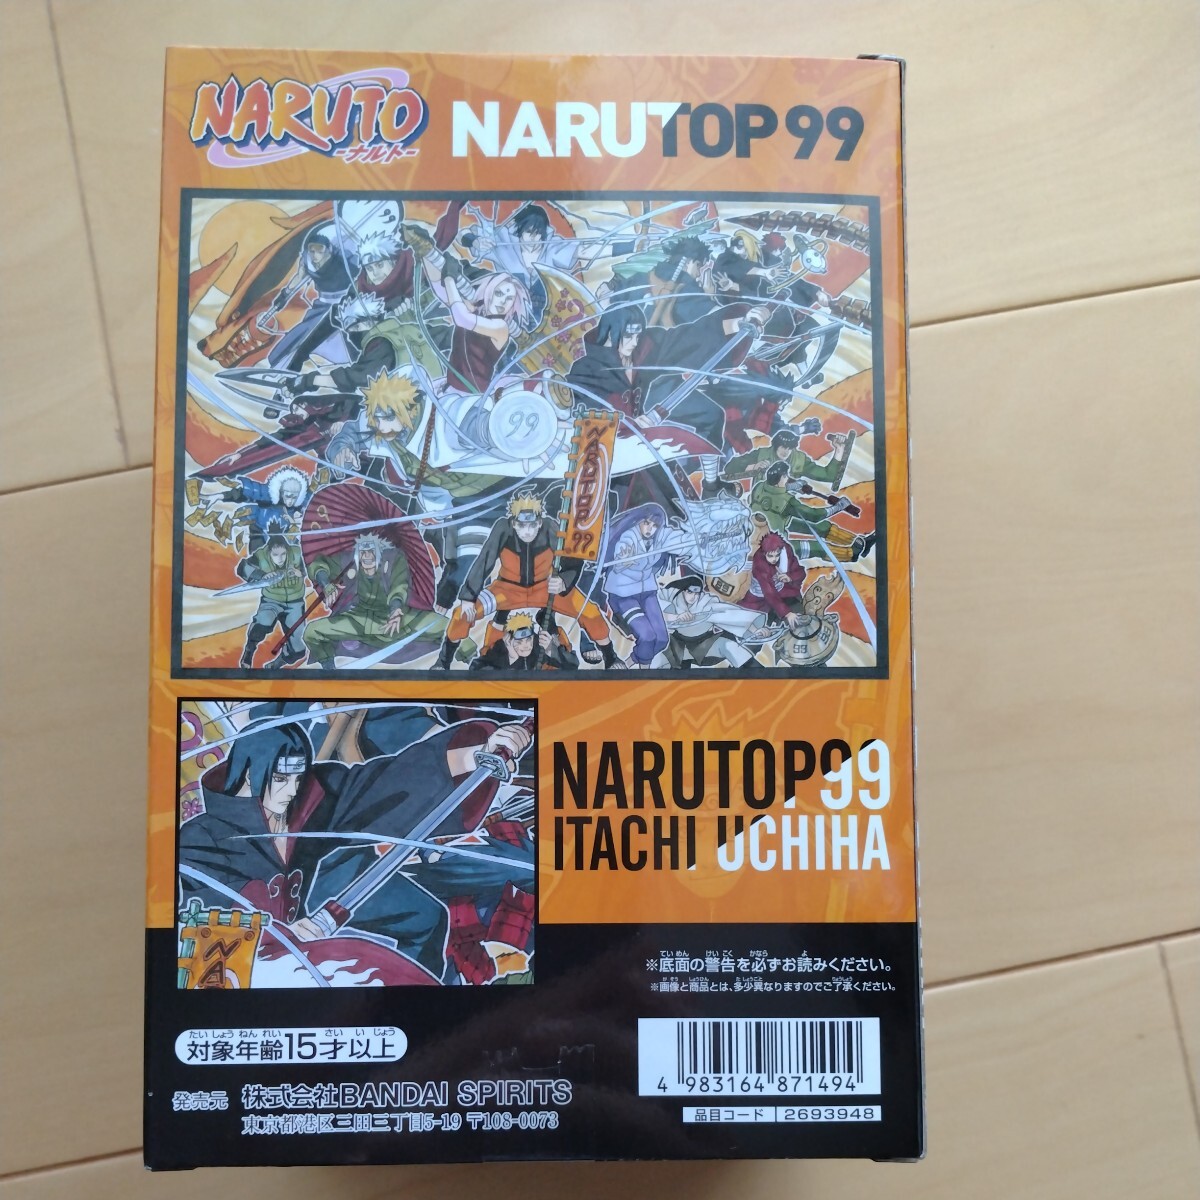 ( most cheap postage, outside fixed form 510 jpy )NARUTO- Naruto -NARUTOP99.. is itachi figure [ postage in explanatory note .] including in a package possible 